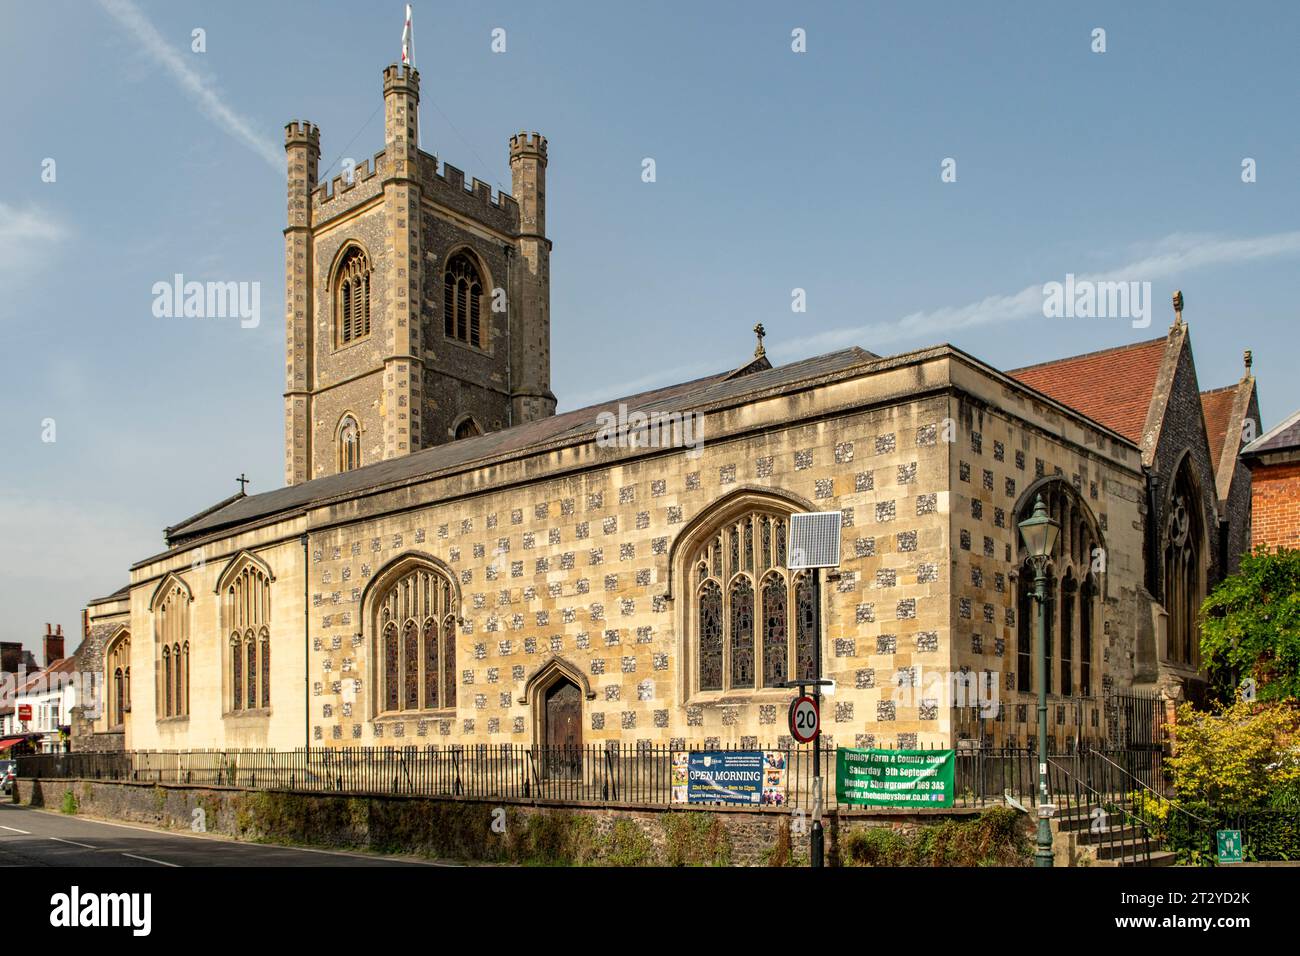 St Mary's Church, Henley-on-Thames, Oxfordshire, Angleterre Banque D'Images